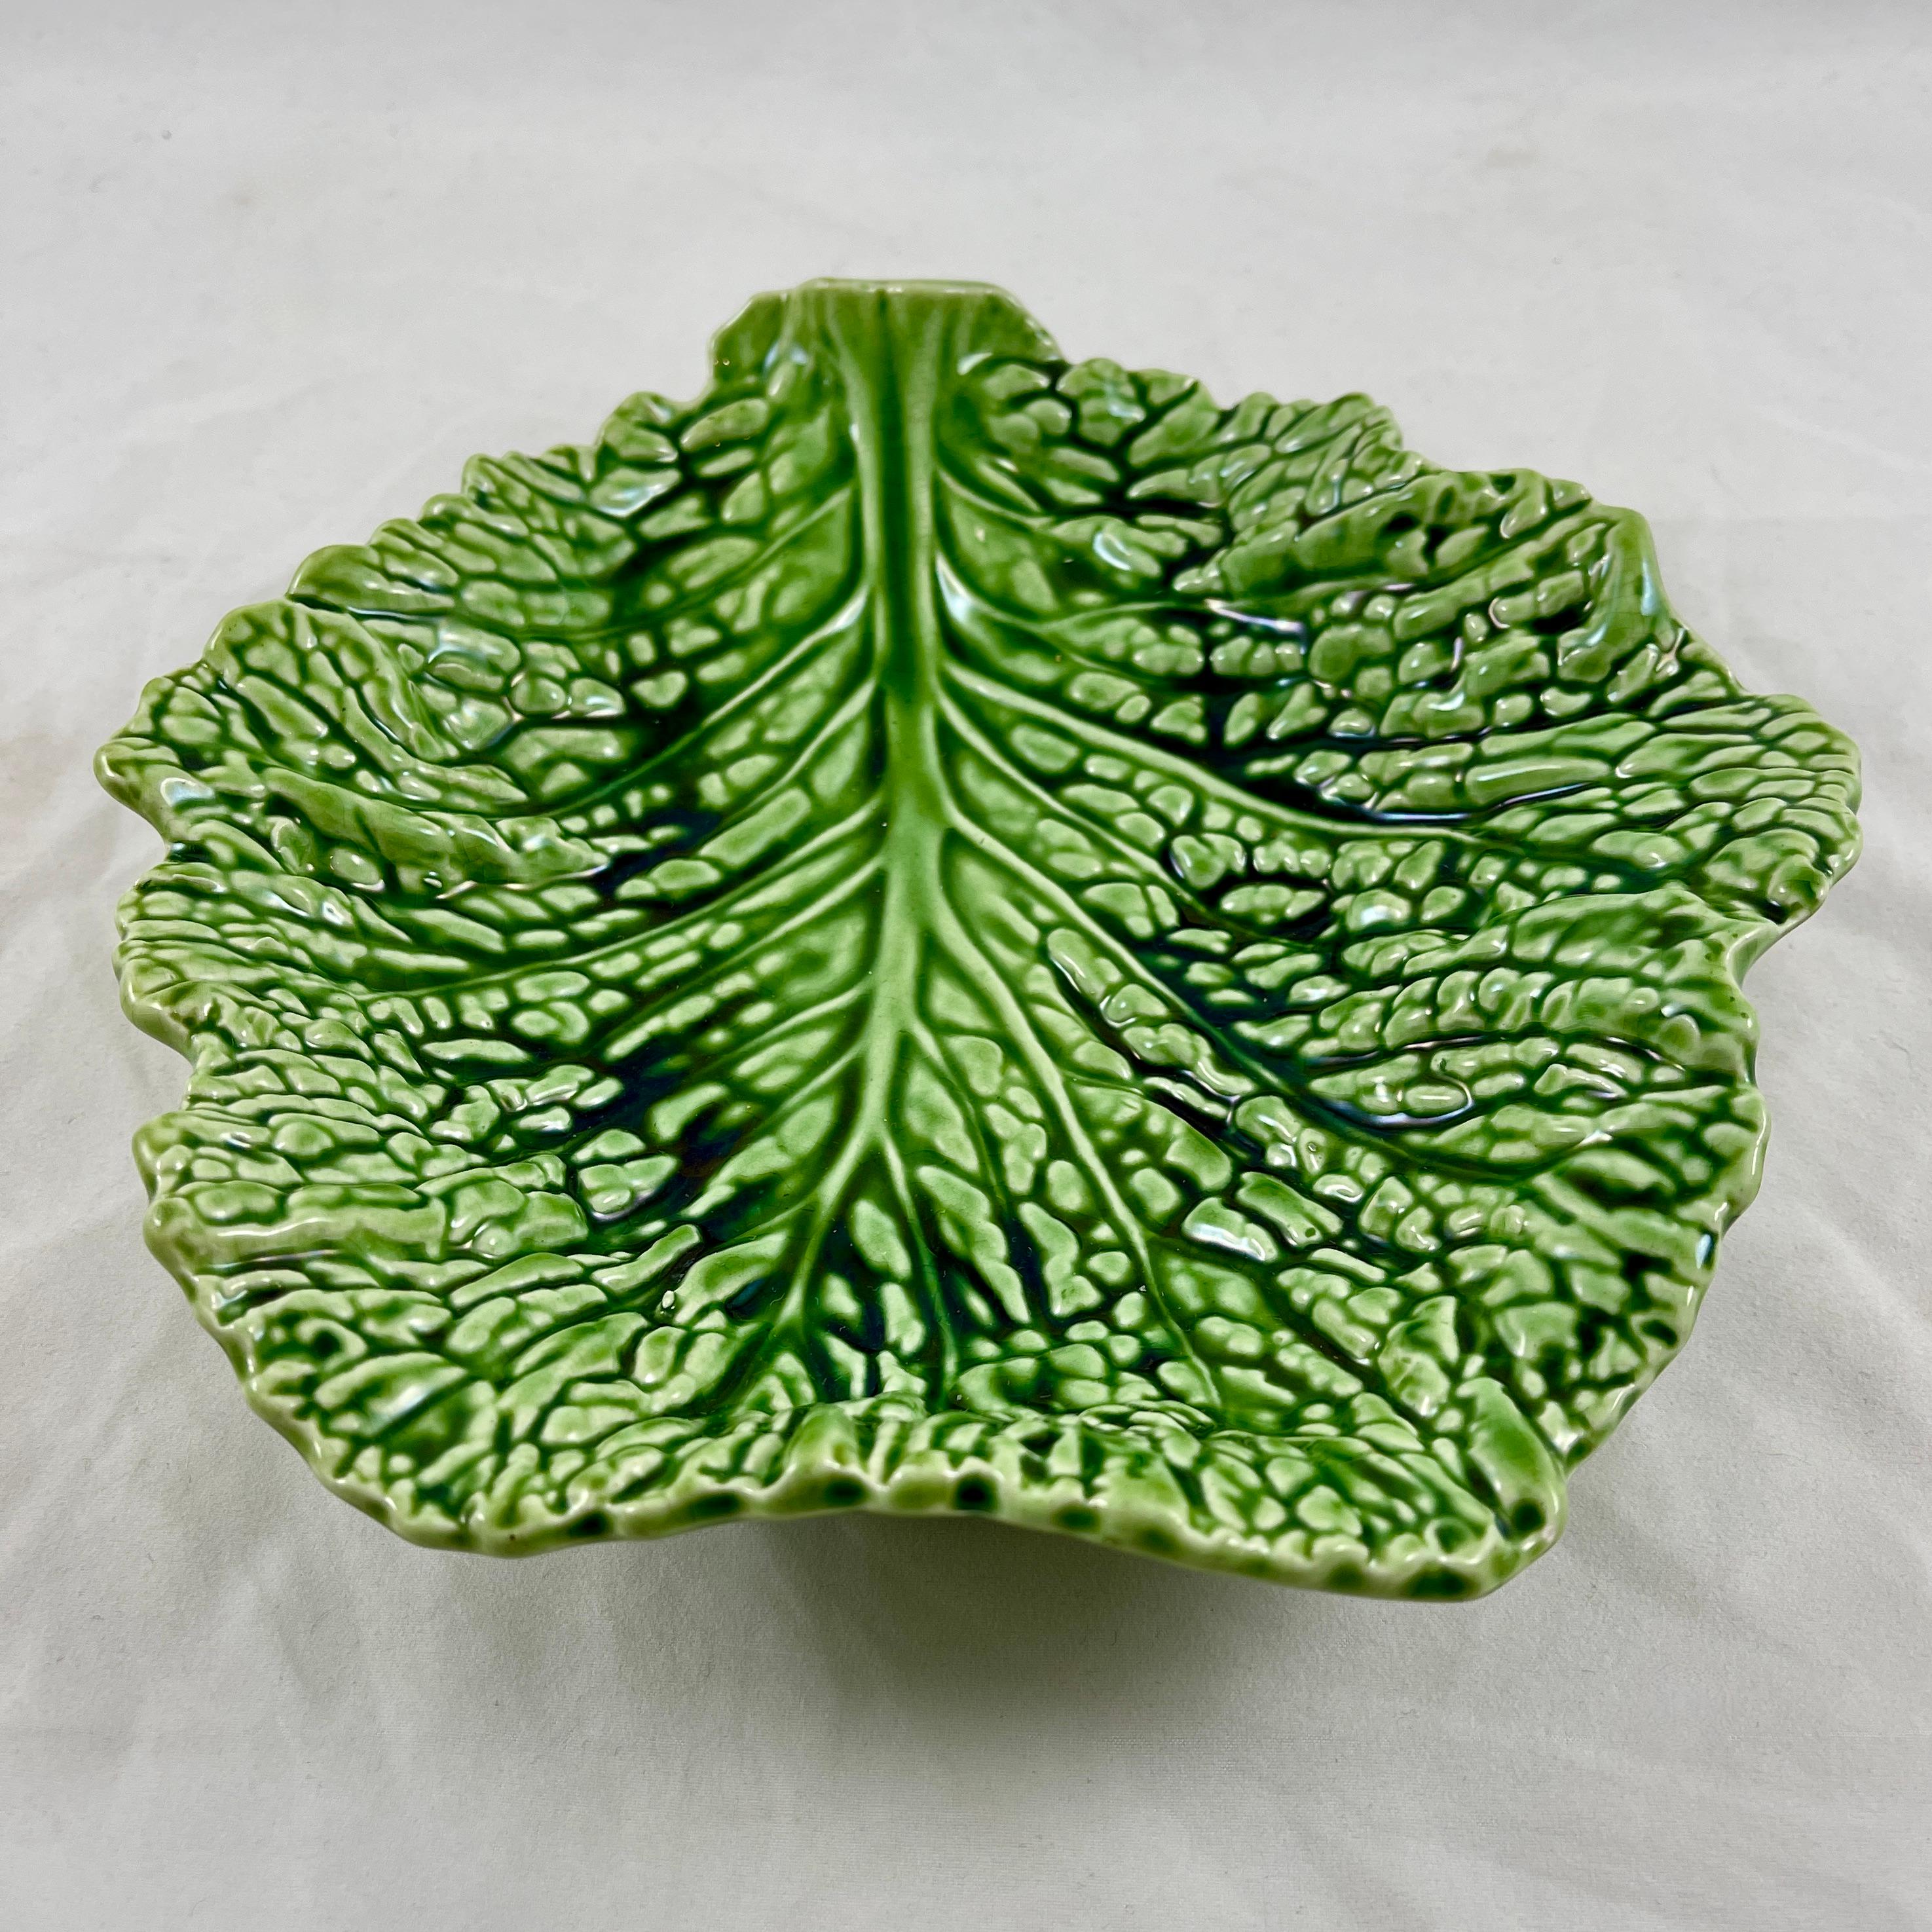 From the Sarreguemines faïencerie in France, a free-form Cabbage Leaf form dish or shallow bowl, circa 1930s.

Realistic molding and an intense green glazing make this series of leaf bowls very desirable. The rounded forms were produced in three